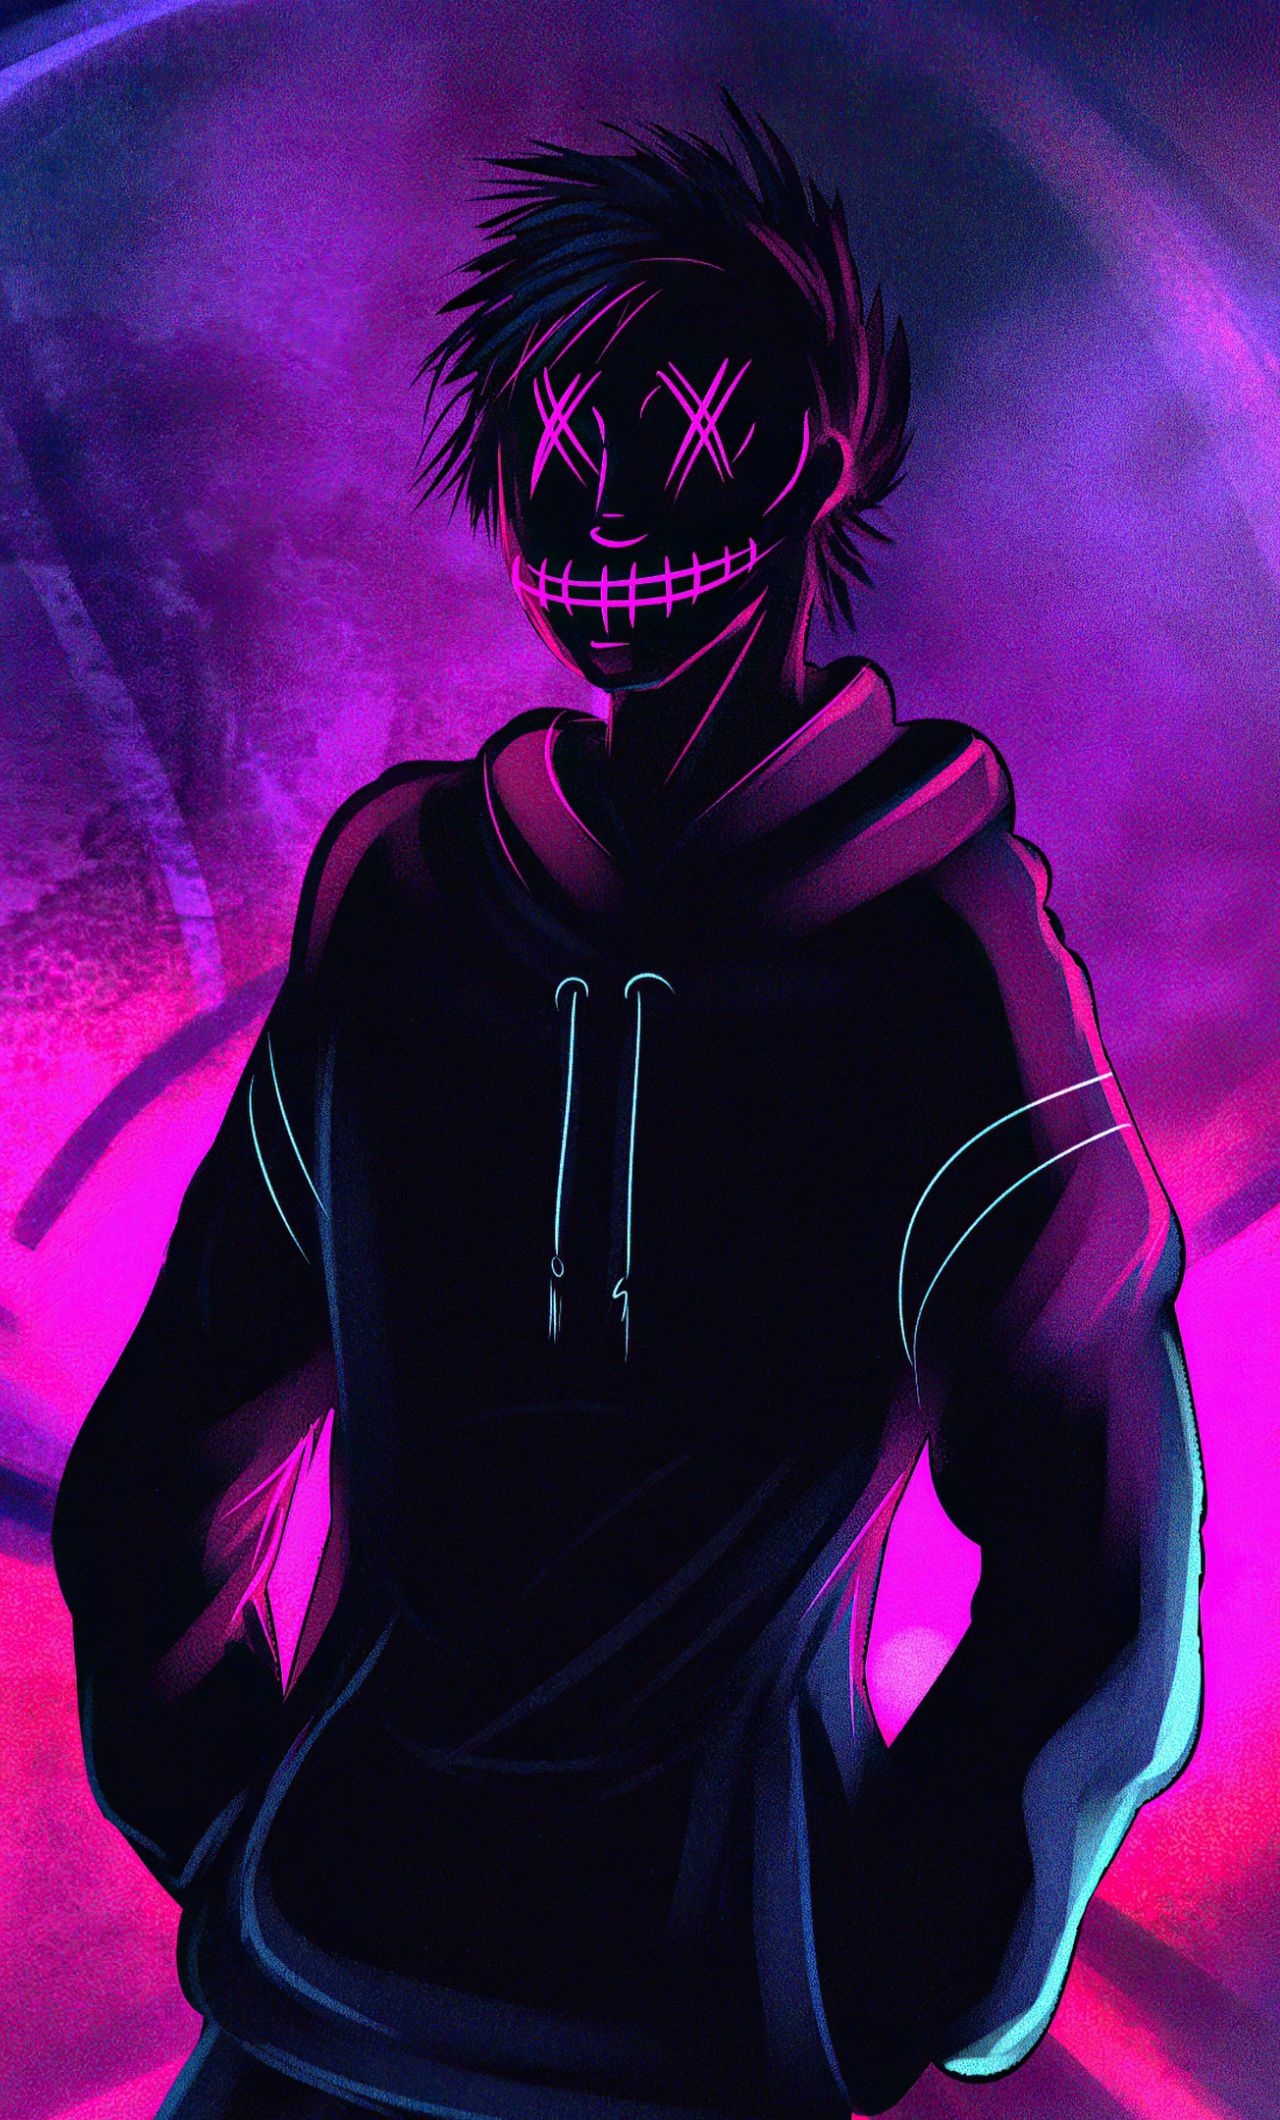 Cool Anonymous Neon Boy iPhone 6 plus Wallpaper, HD Artist 4K Wallpaper, Image, Photo and Background